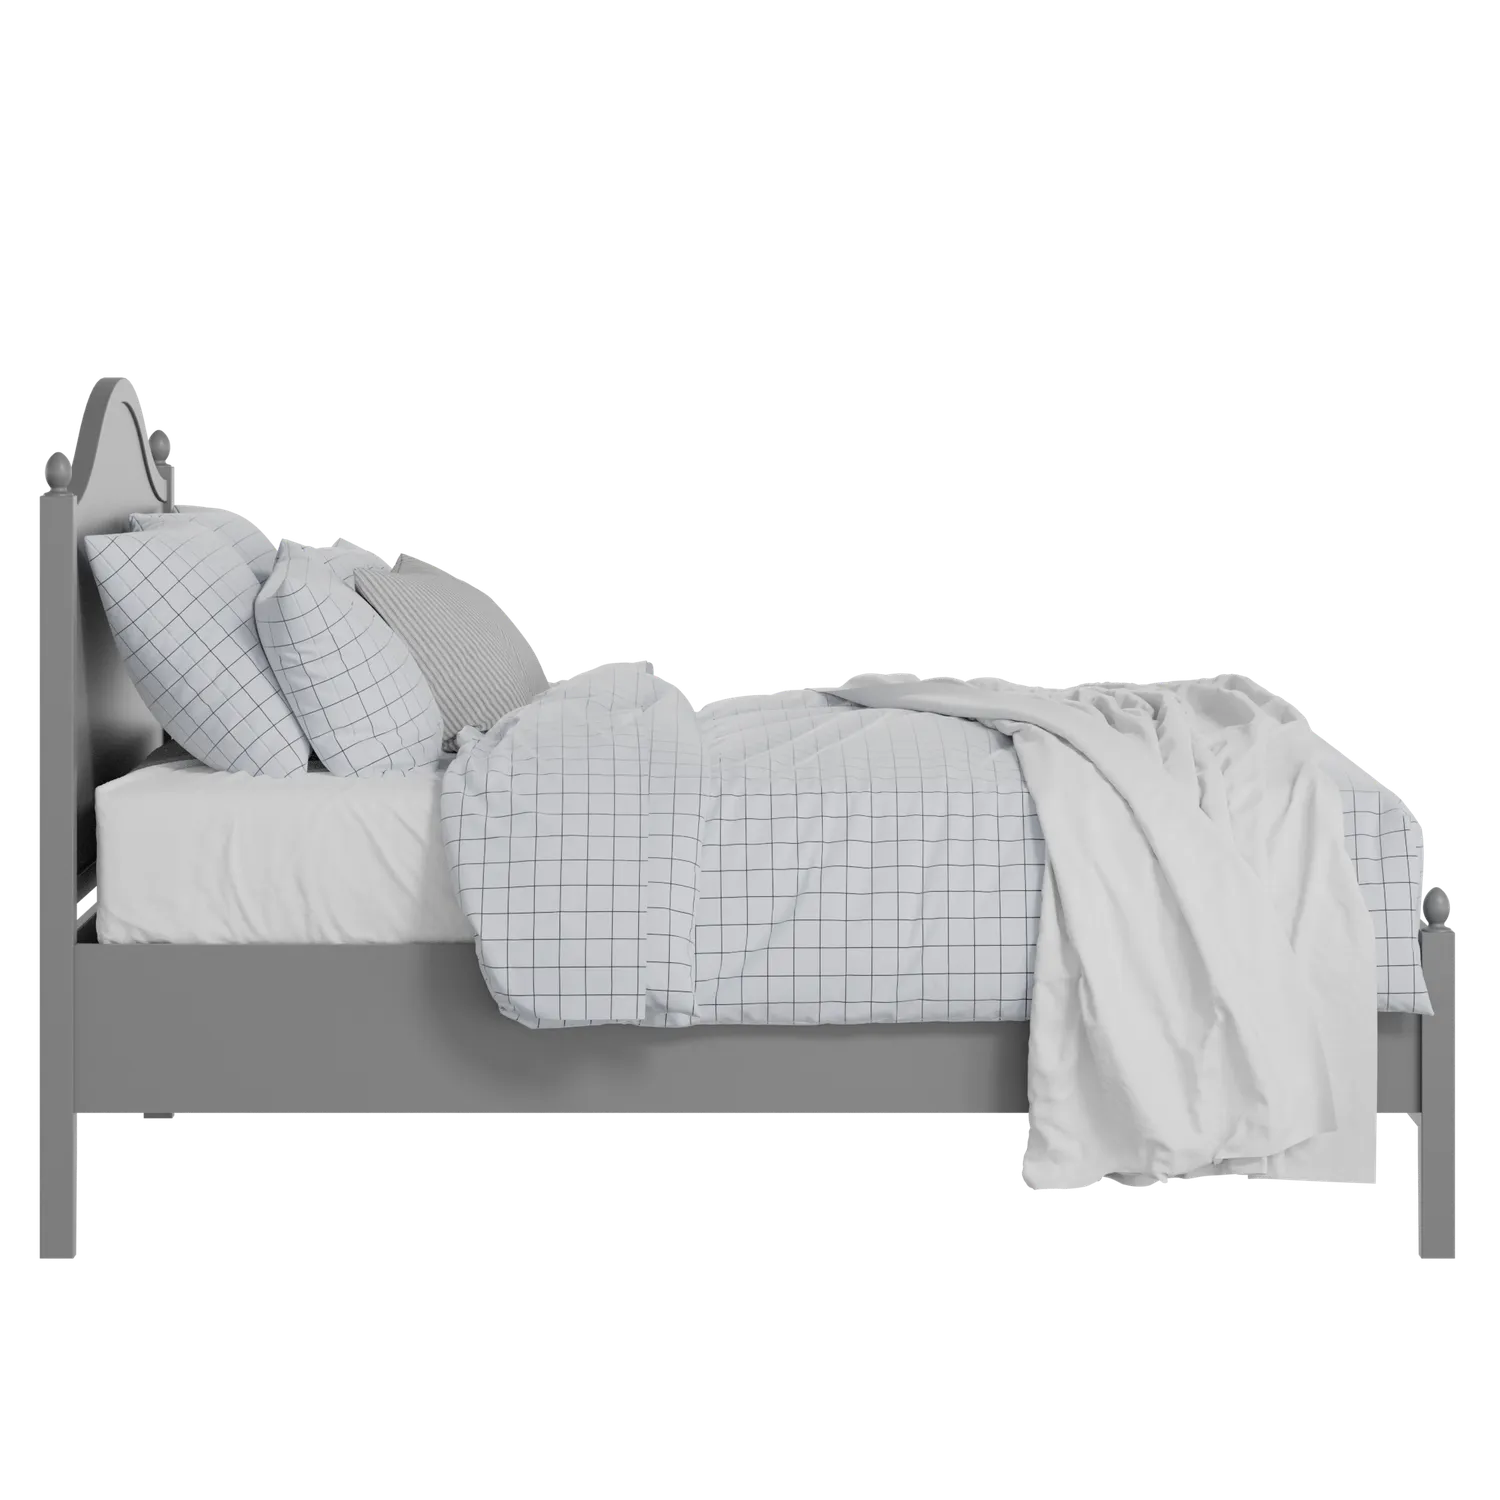 Brady Slim painted wood bed in grey with Juno mattress